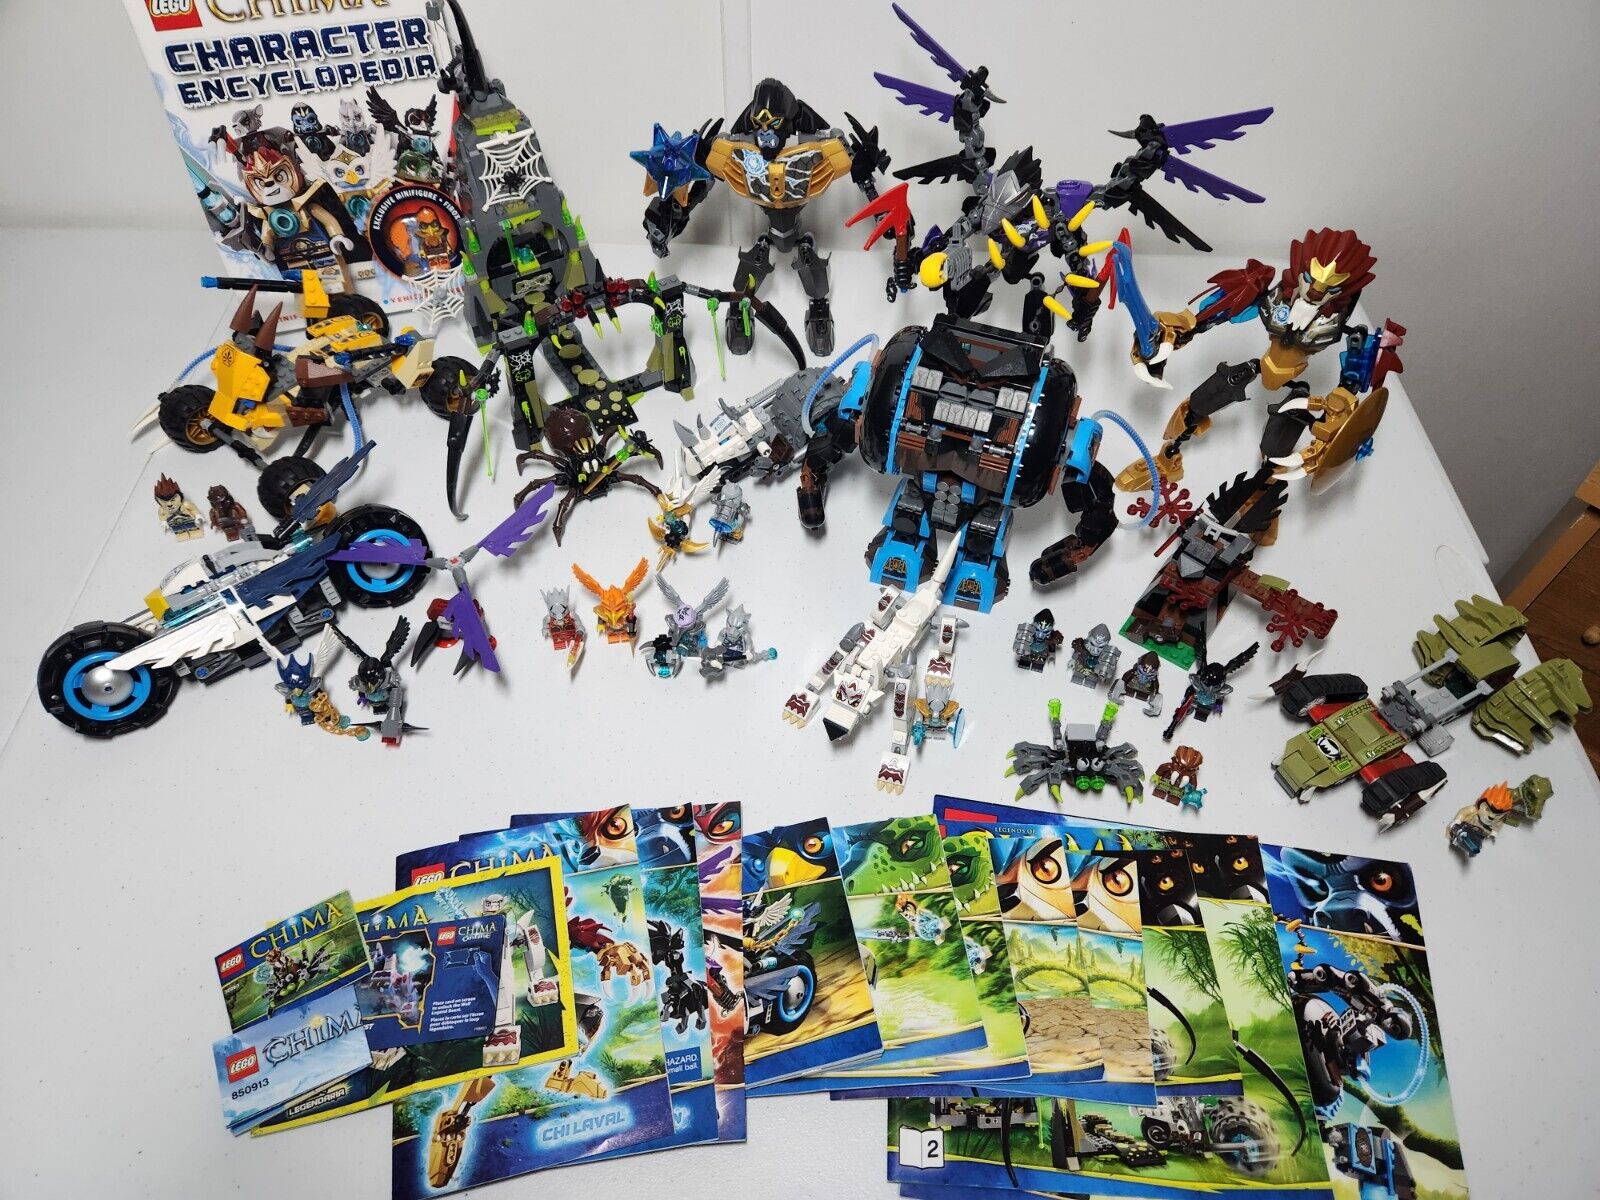 Lego Legends of Chima Lot 100% Complete All Minifigures + Instructions + Book